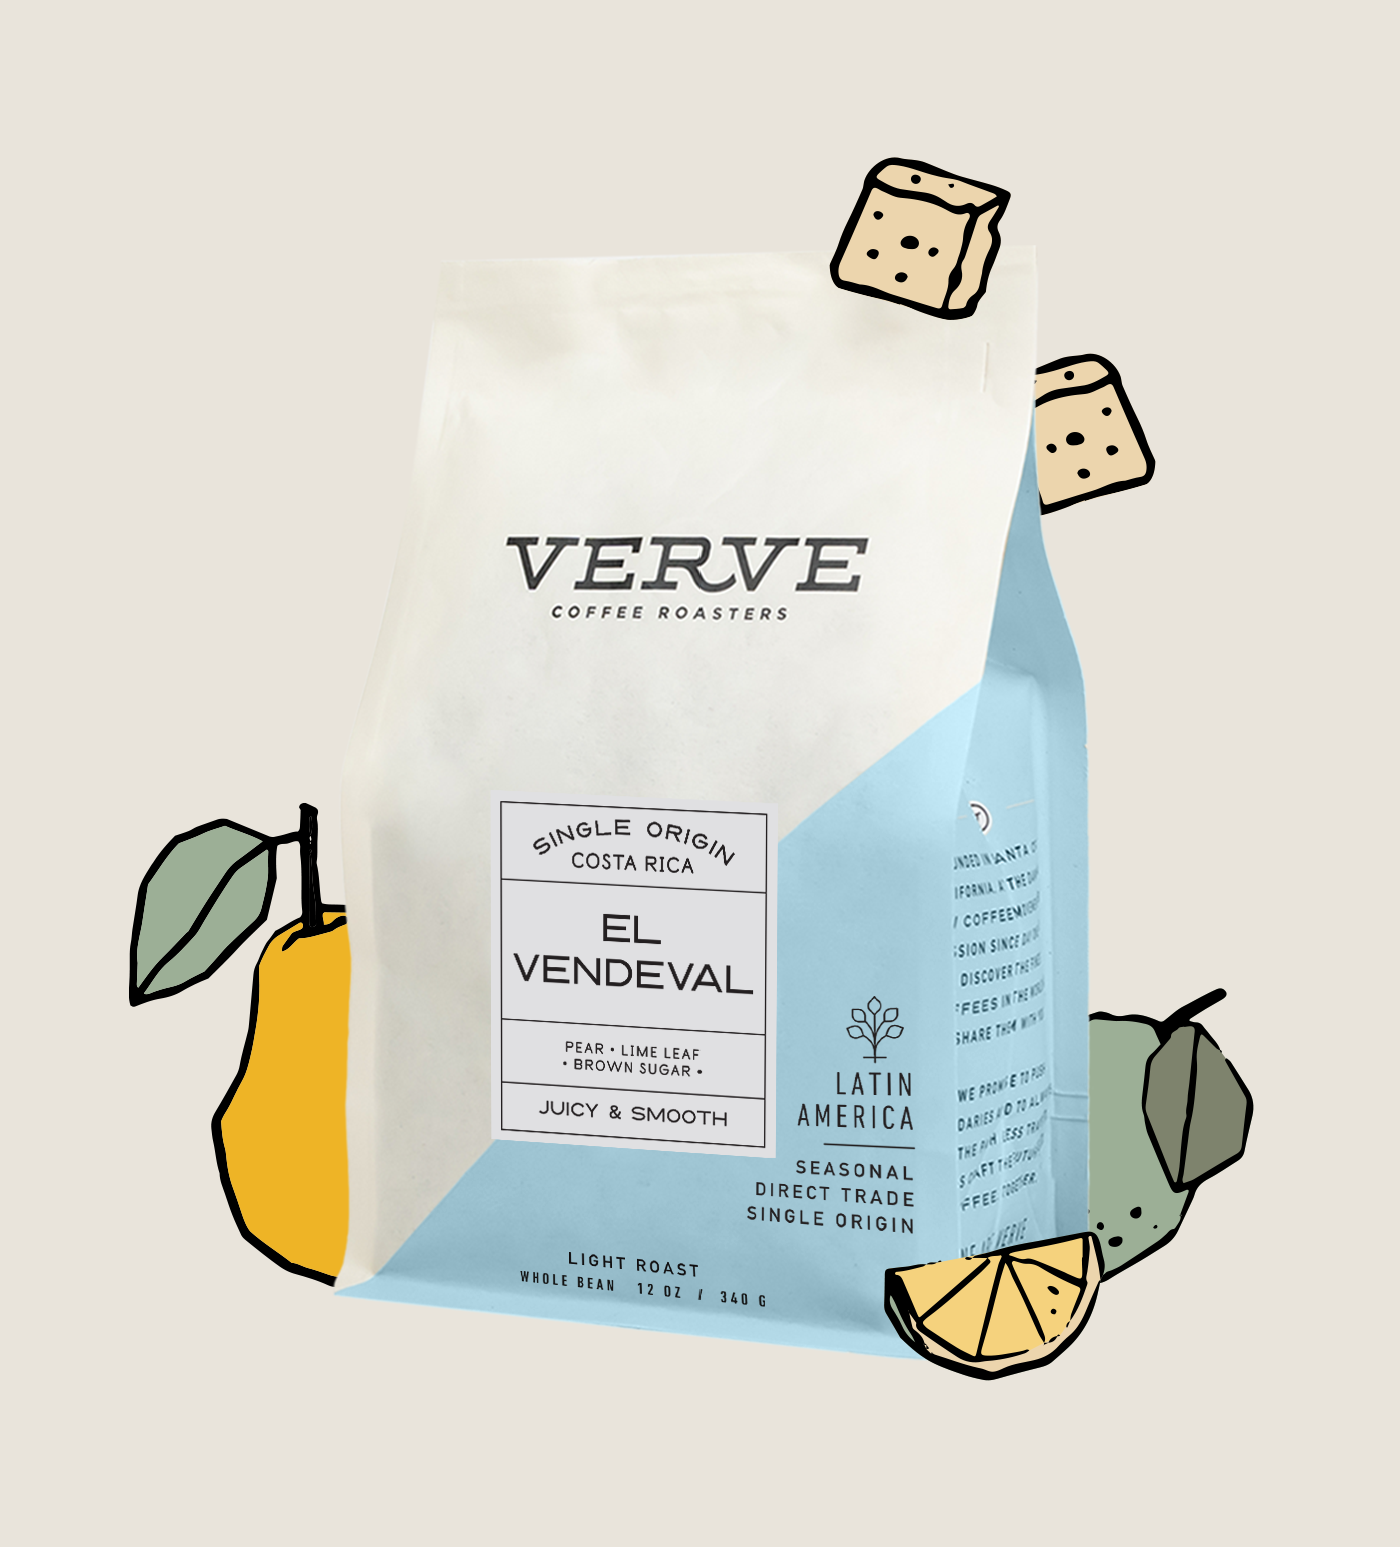 El Vendeval whole bean with tasting notes